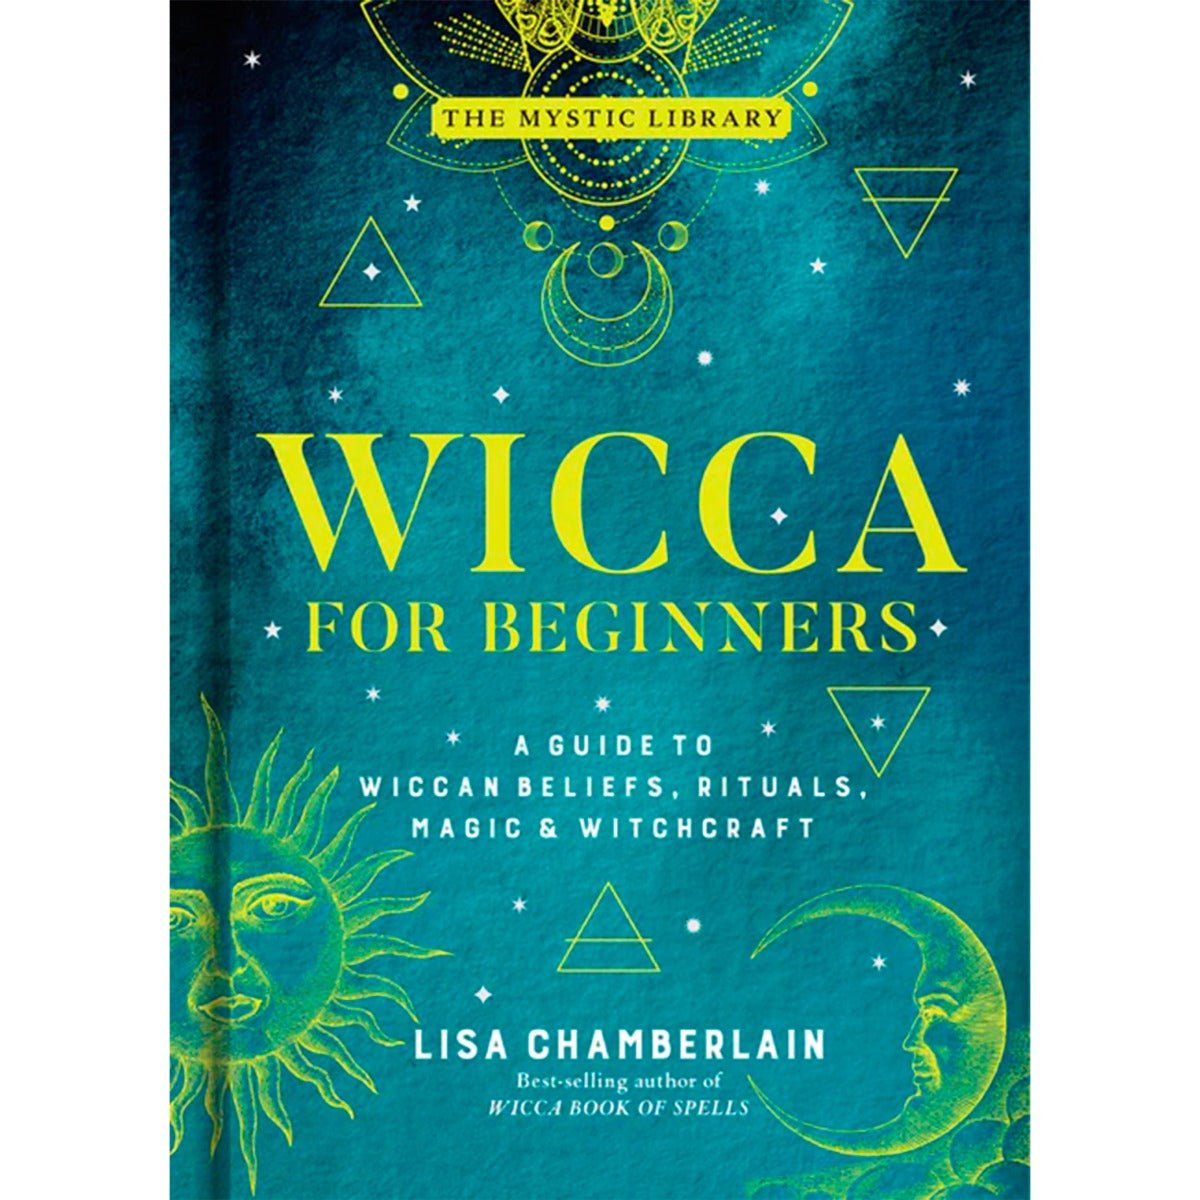 Wicca For Beginners - 13 Moons